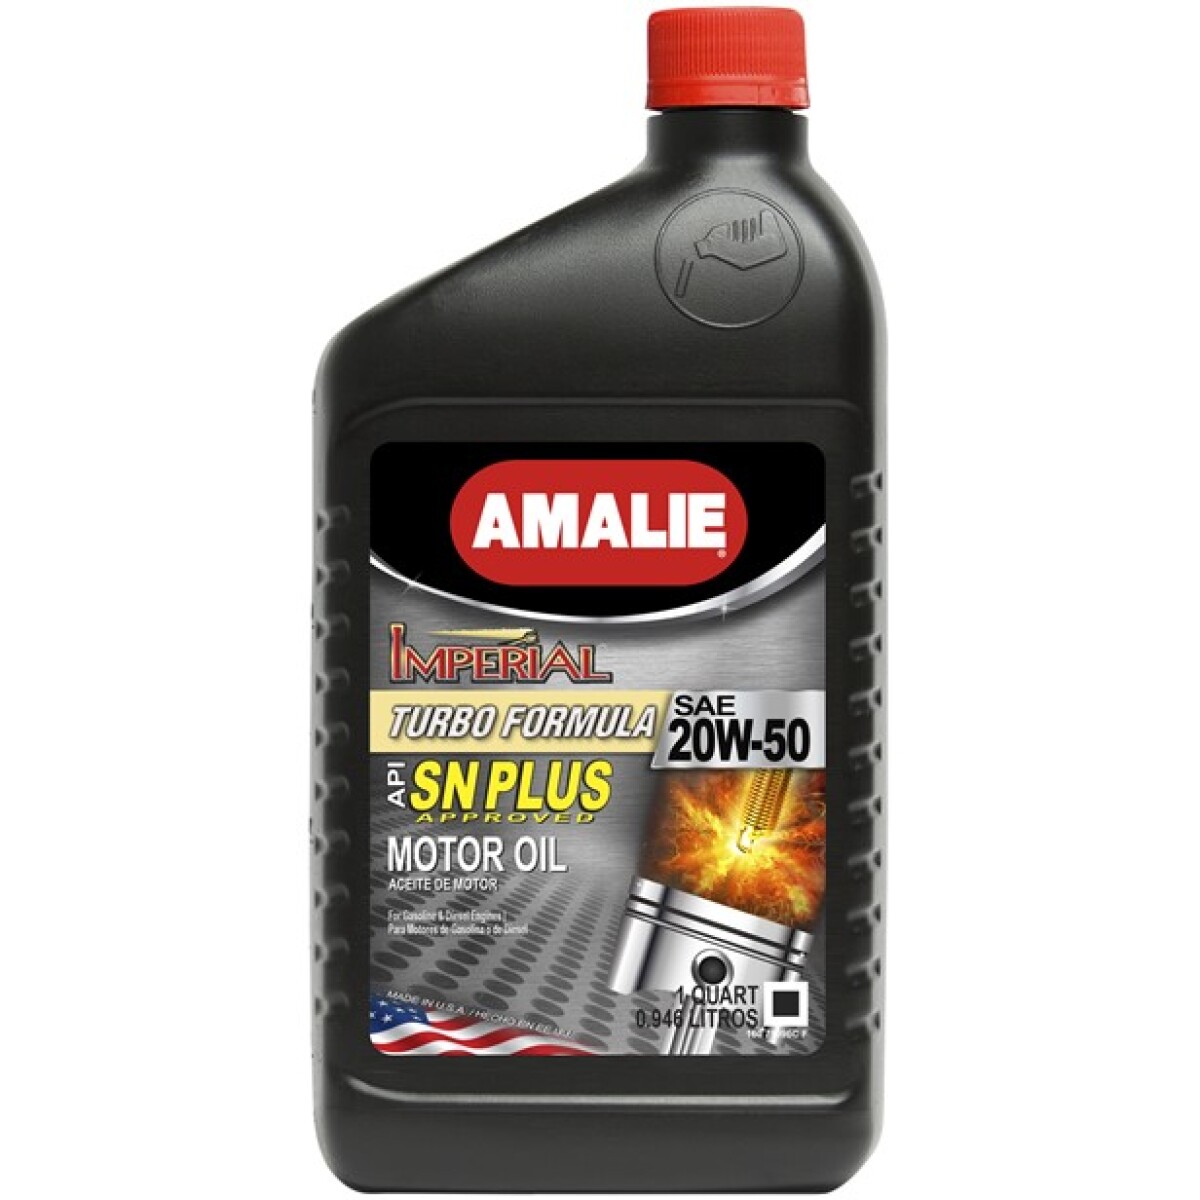 LUBRICANTE ACEITES - 20W50 MINERAL 1LTS IMPERIAL TURBO AMALIE MOTOR OIL 